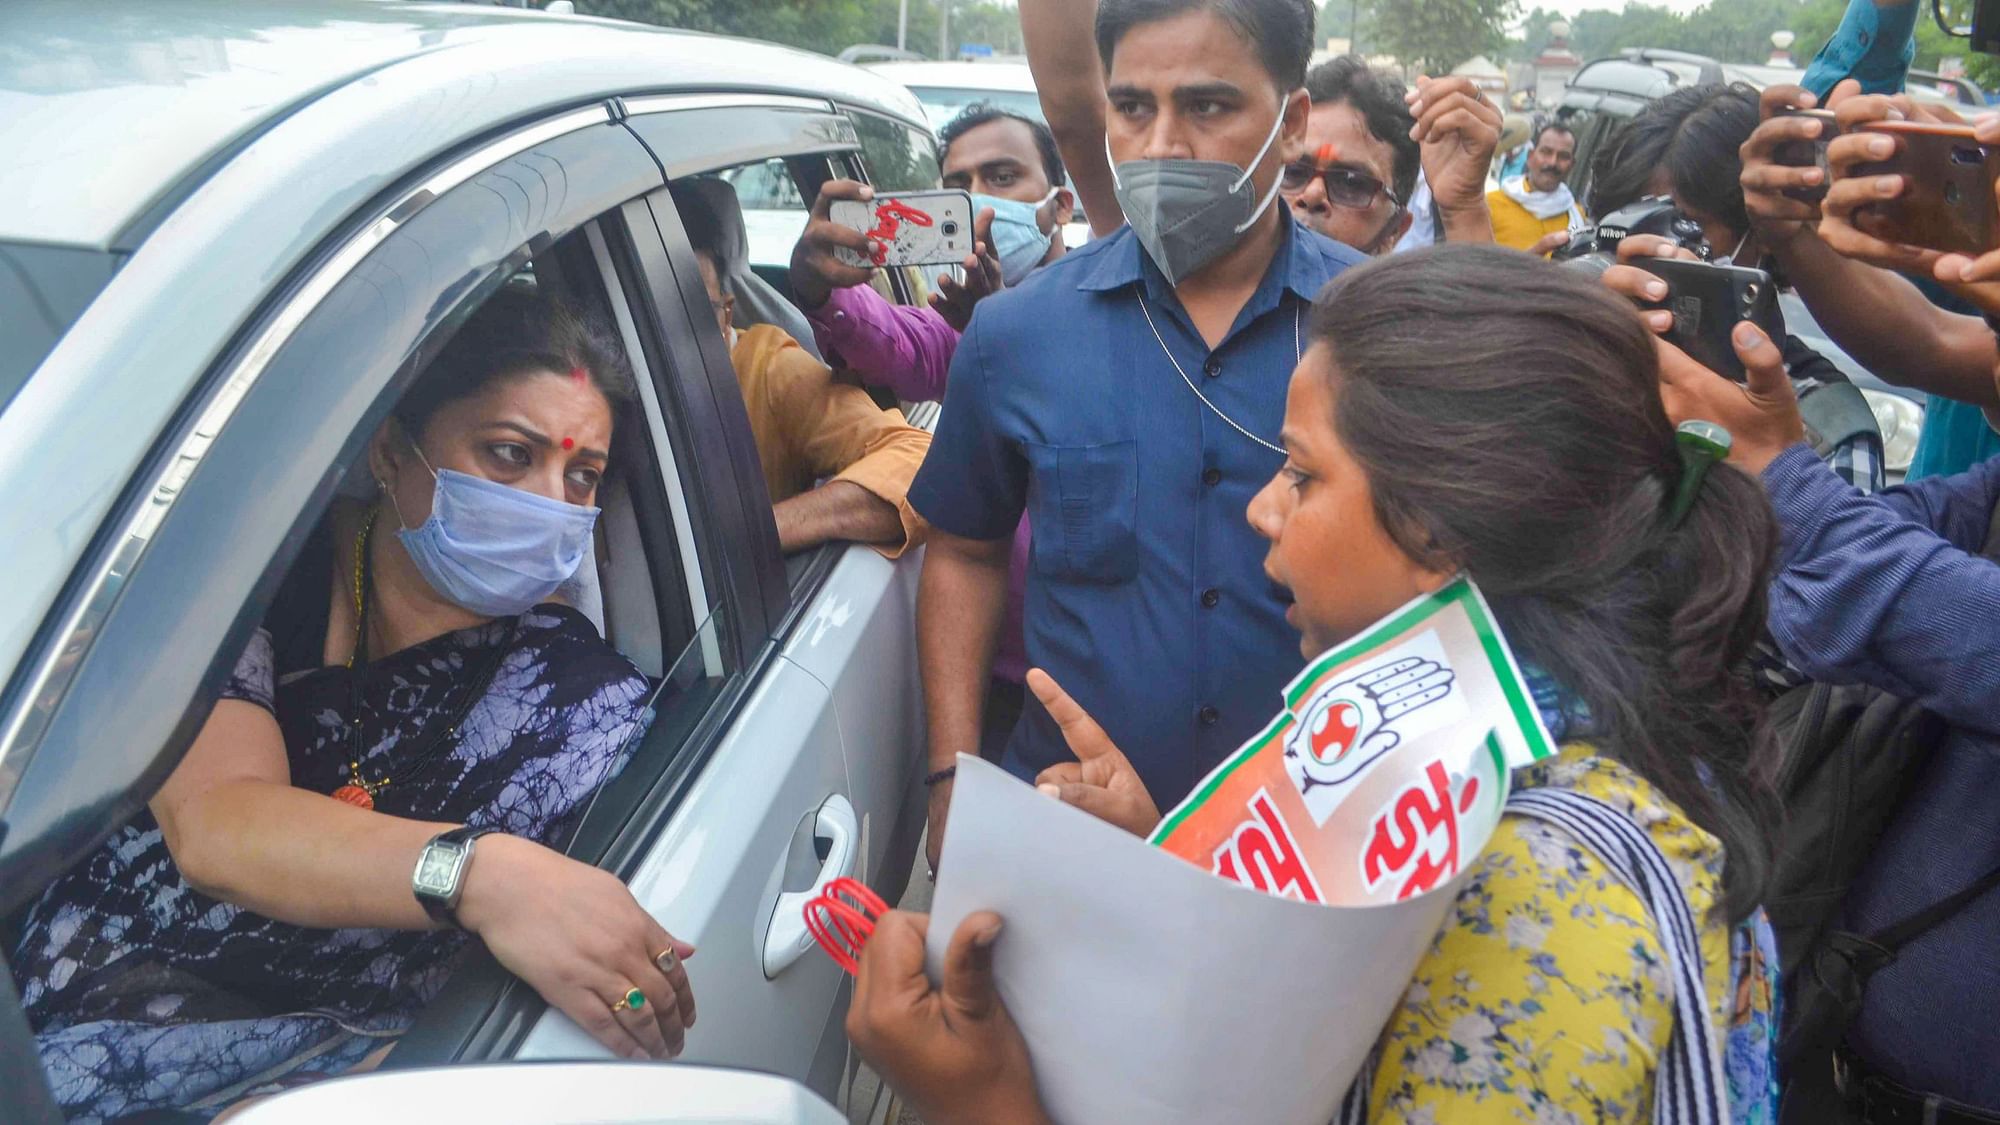 Congress workers, aggrieved by Irani’s comments, tried to stop her car in Varanasi on Saturday, 3 October, chanting “Smriti Irani go back” and “we want justice” slogans.